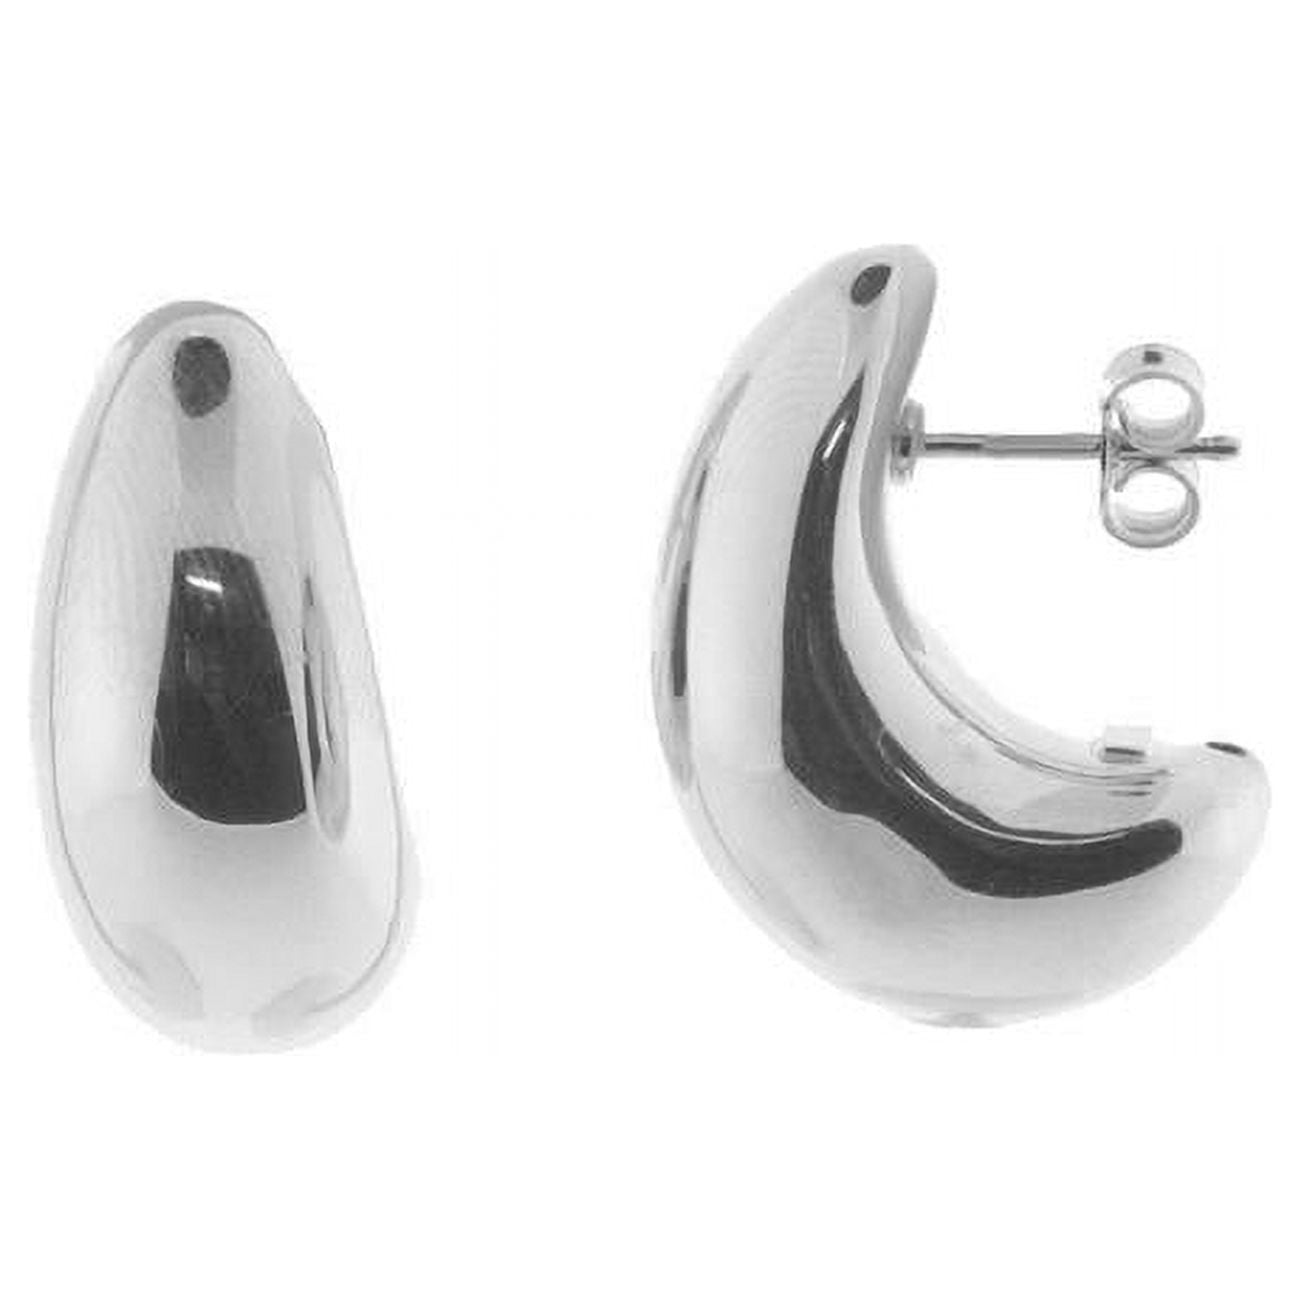 Picture of Fronay 405295 Half Moon Electroformed Sterling Silver Earrings